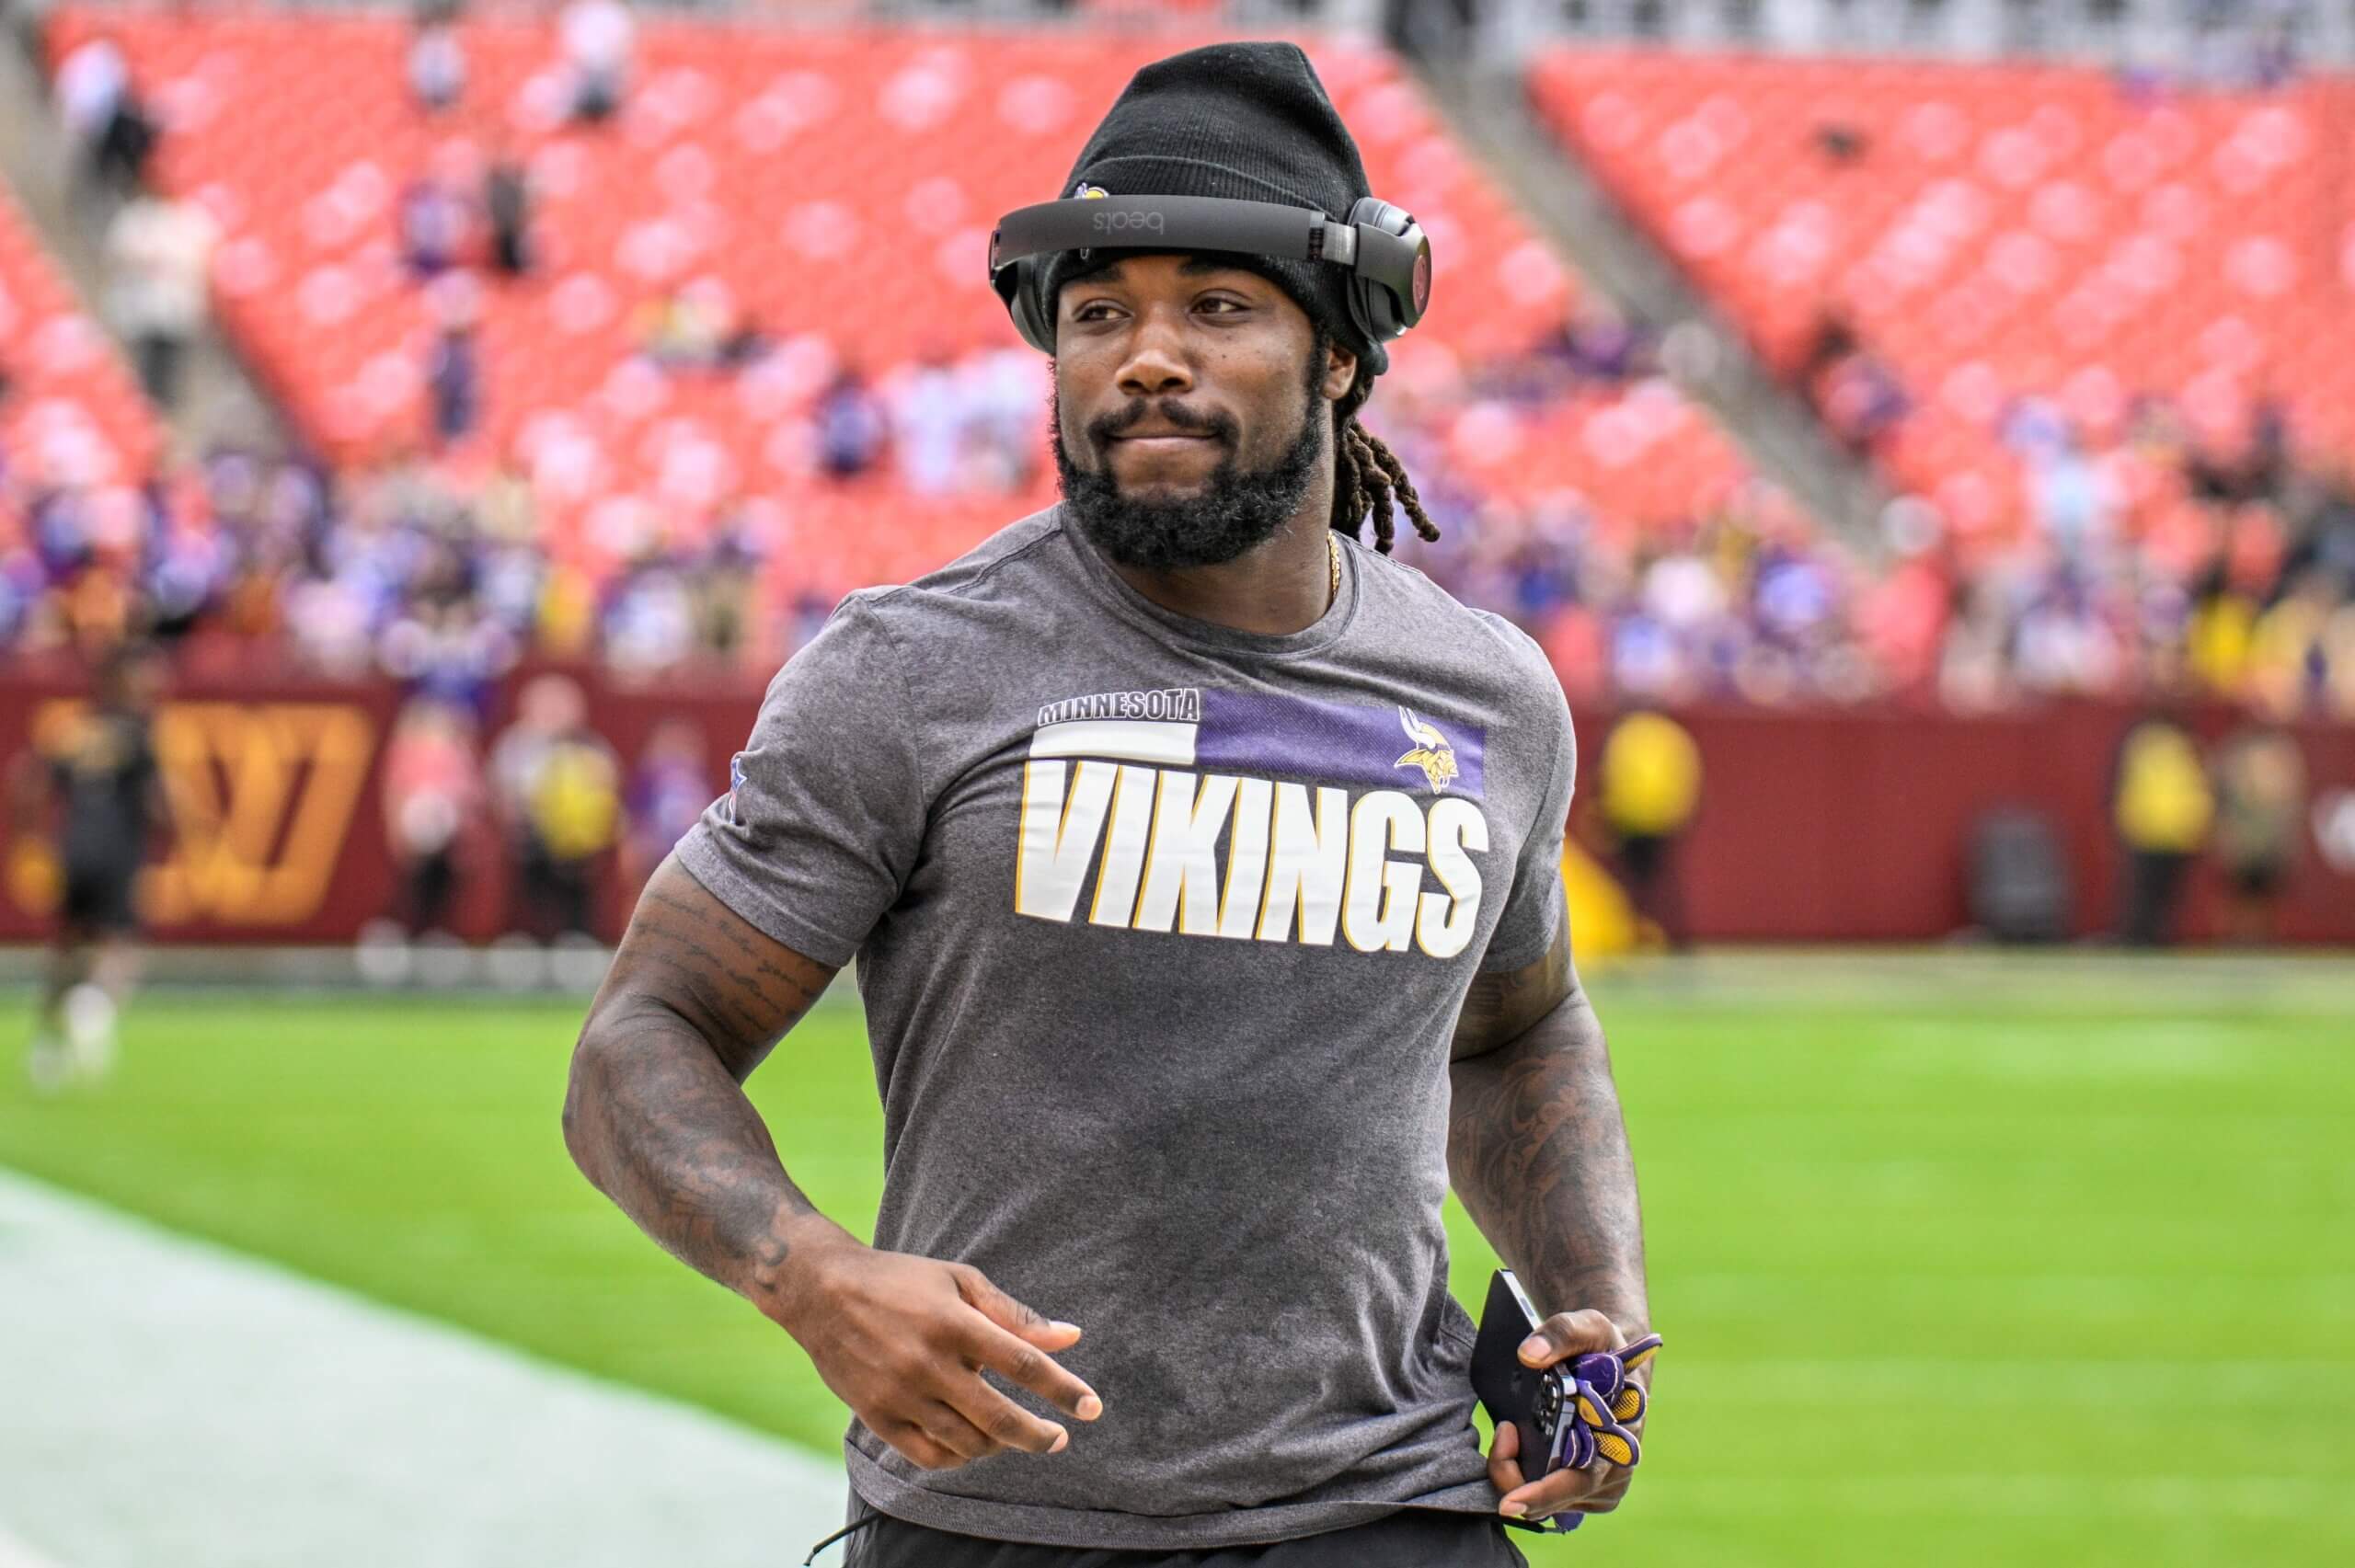 Jets sign 4x Pro Bowl running back Dalvin Cook to 1-year deal